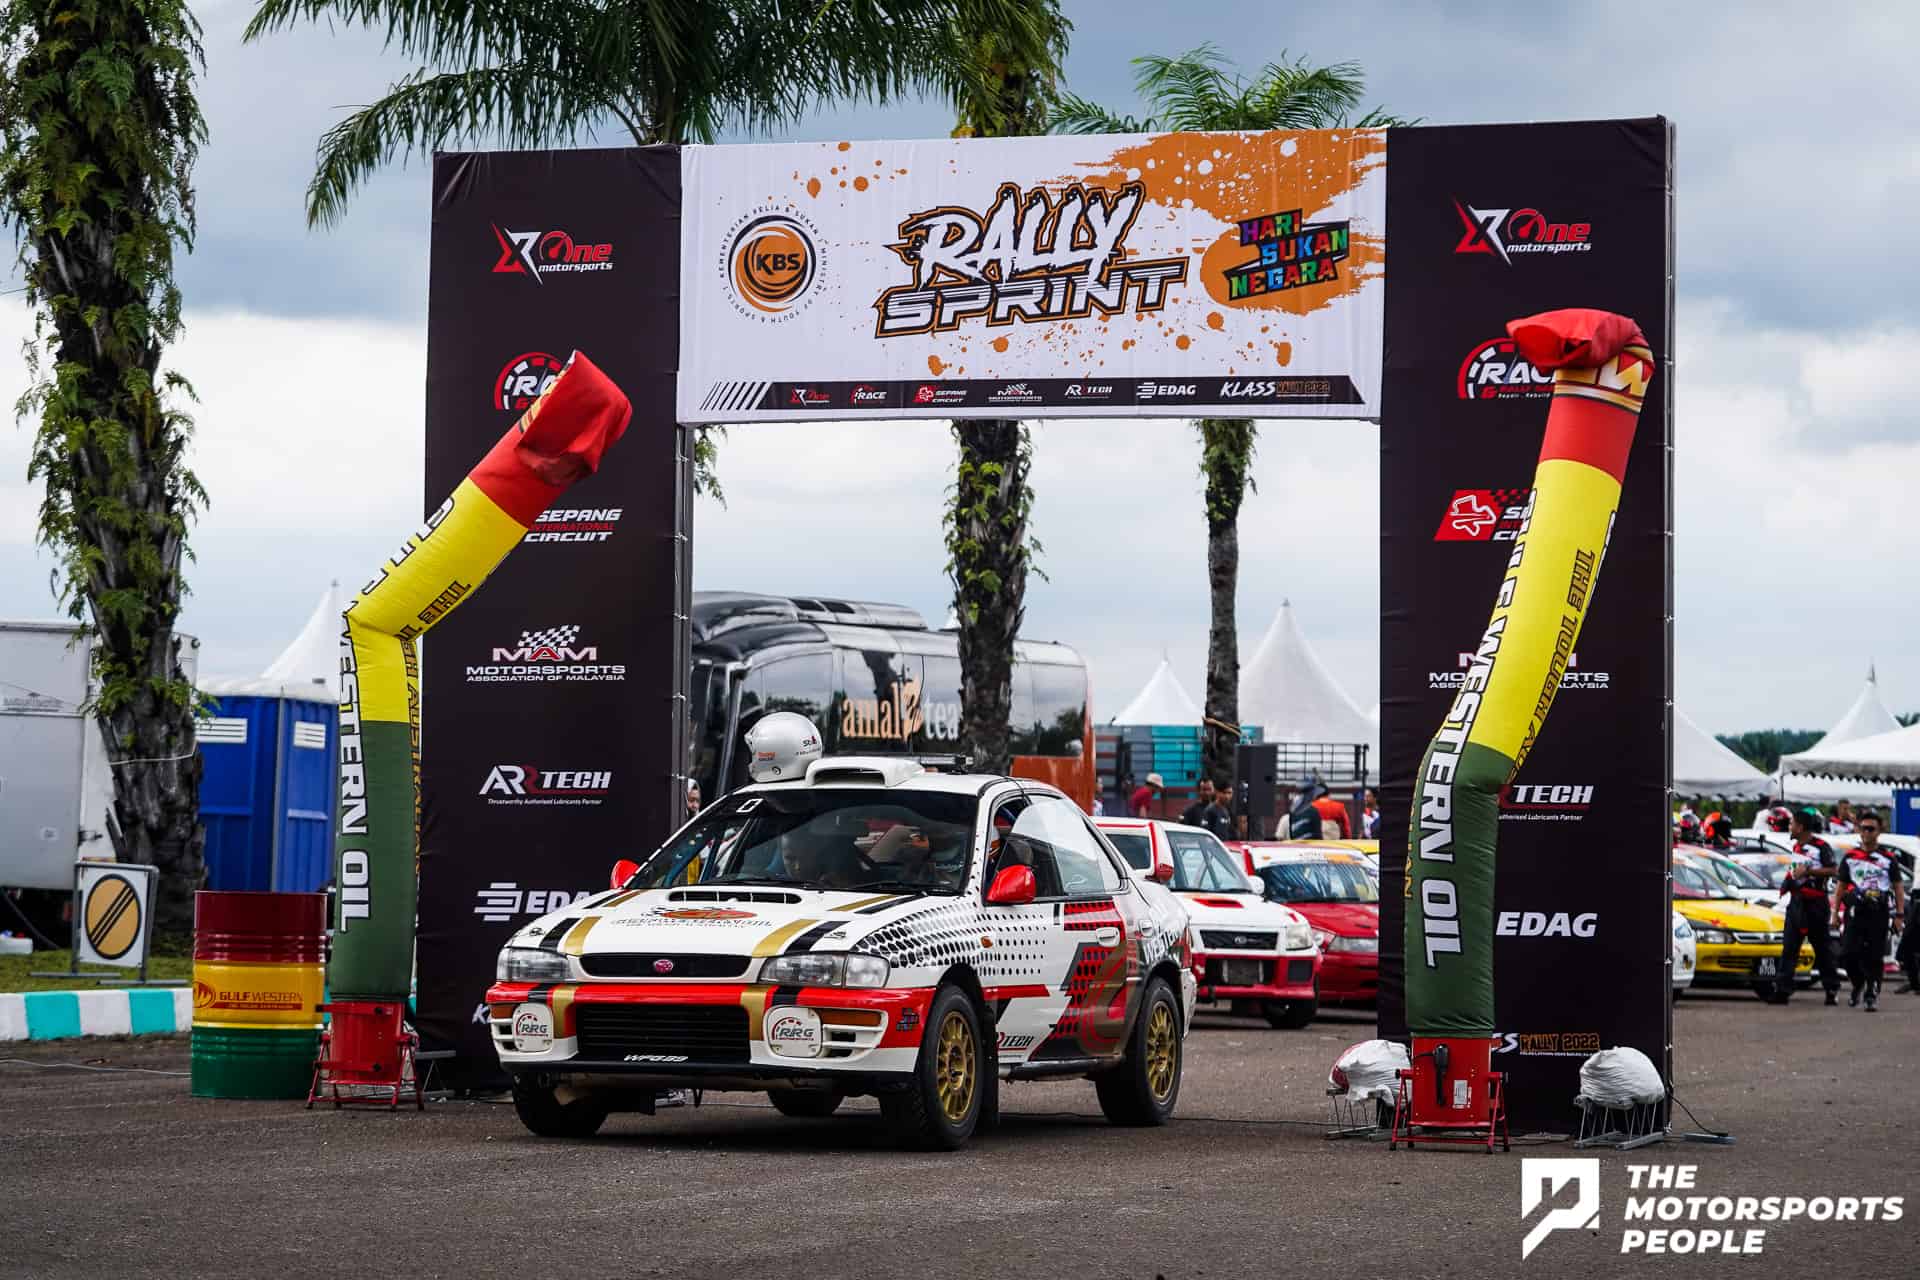 KBS Rally Sprint Round 2 concludes 2022 with a Bang!